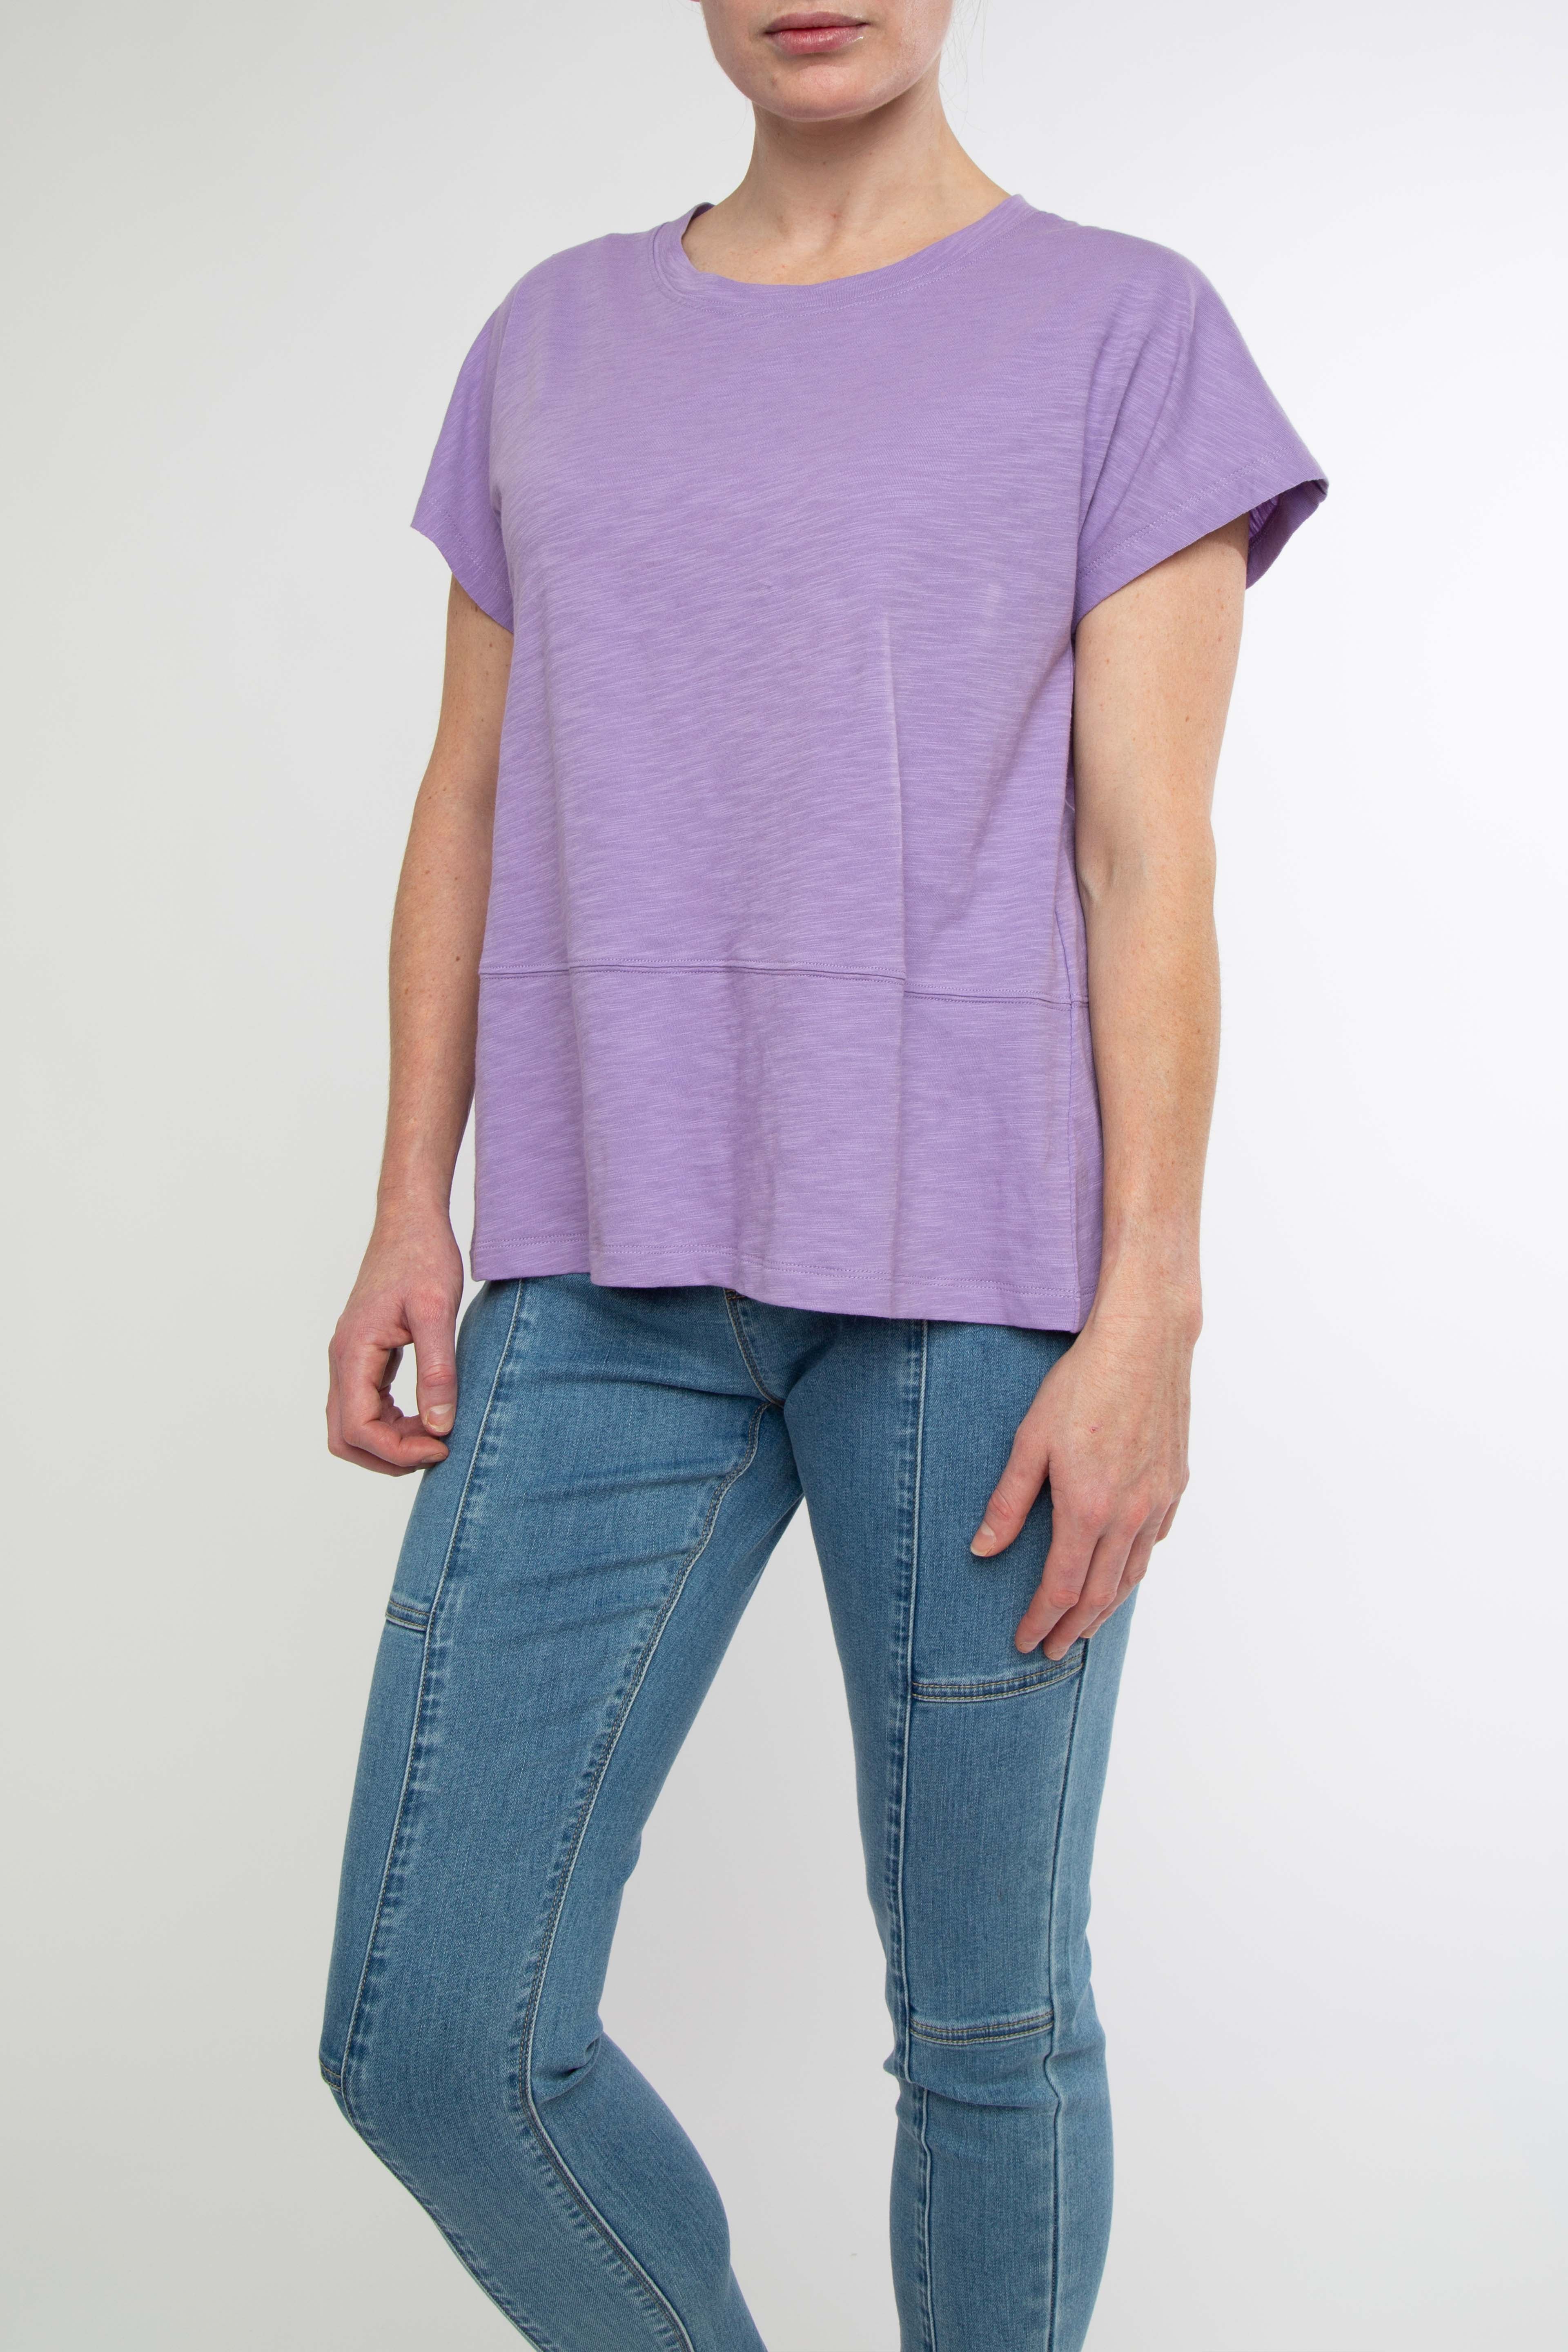 PING PONG BUTTON BACK TEE - WISTERIA